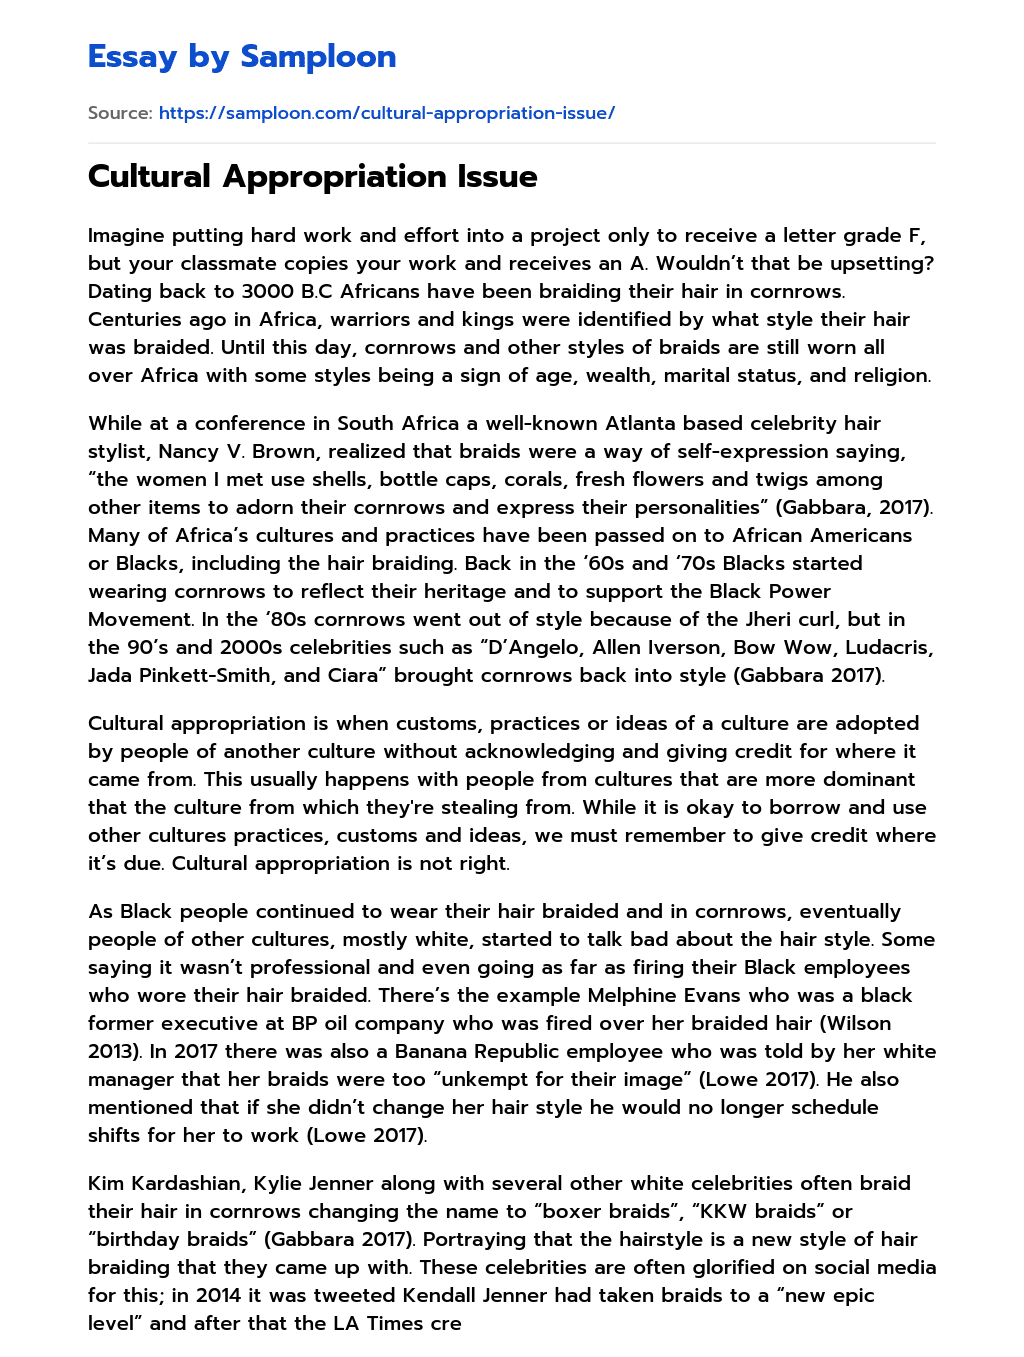 thesis statement about cultural appropriation